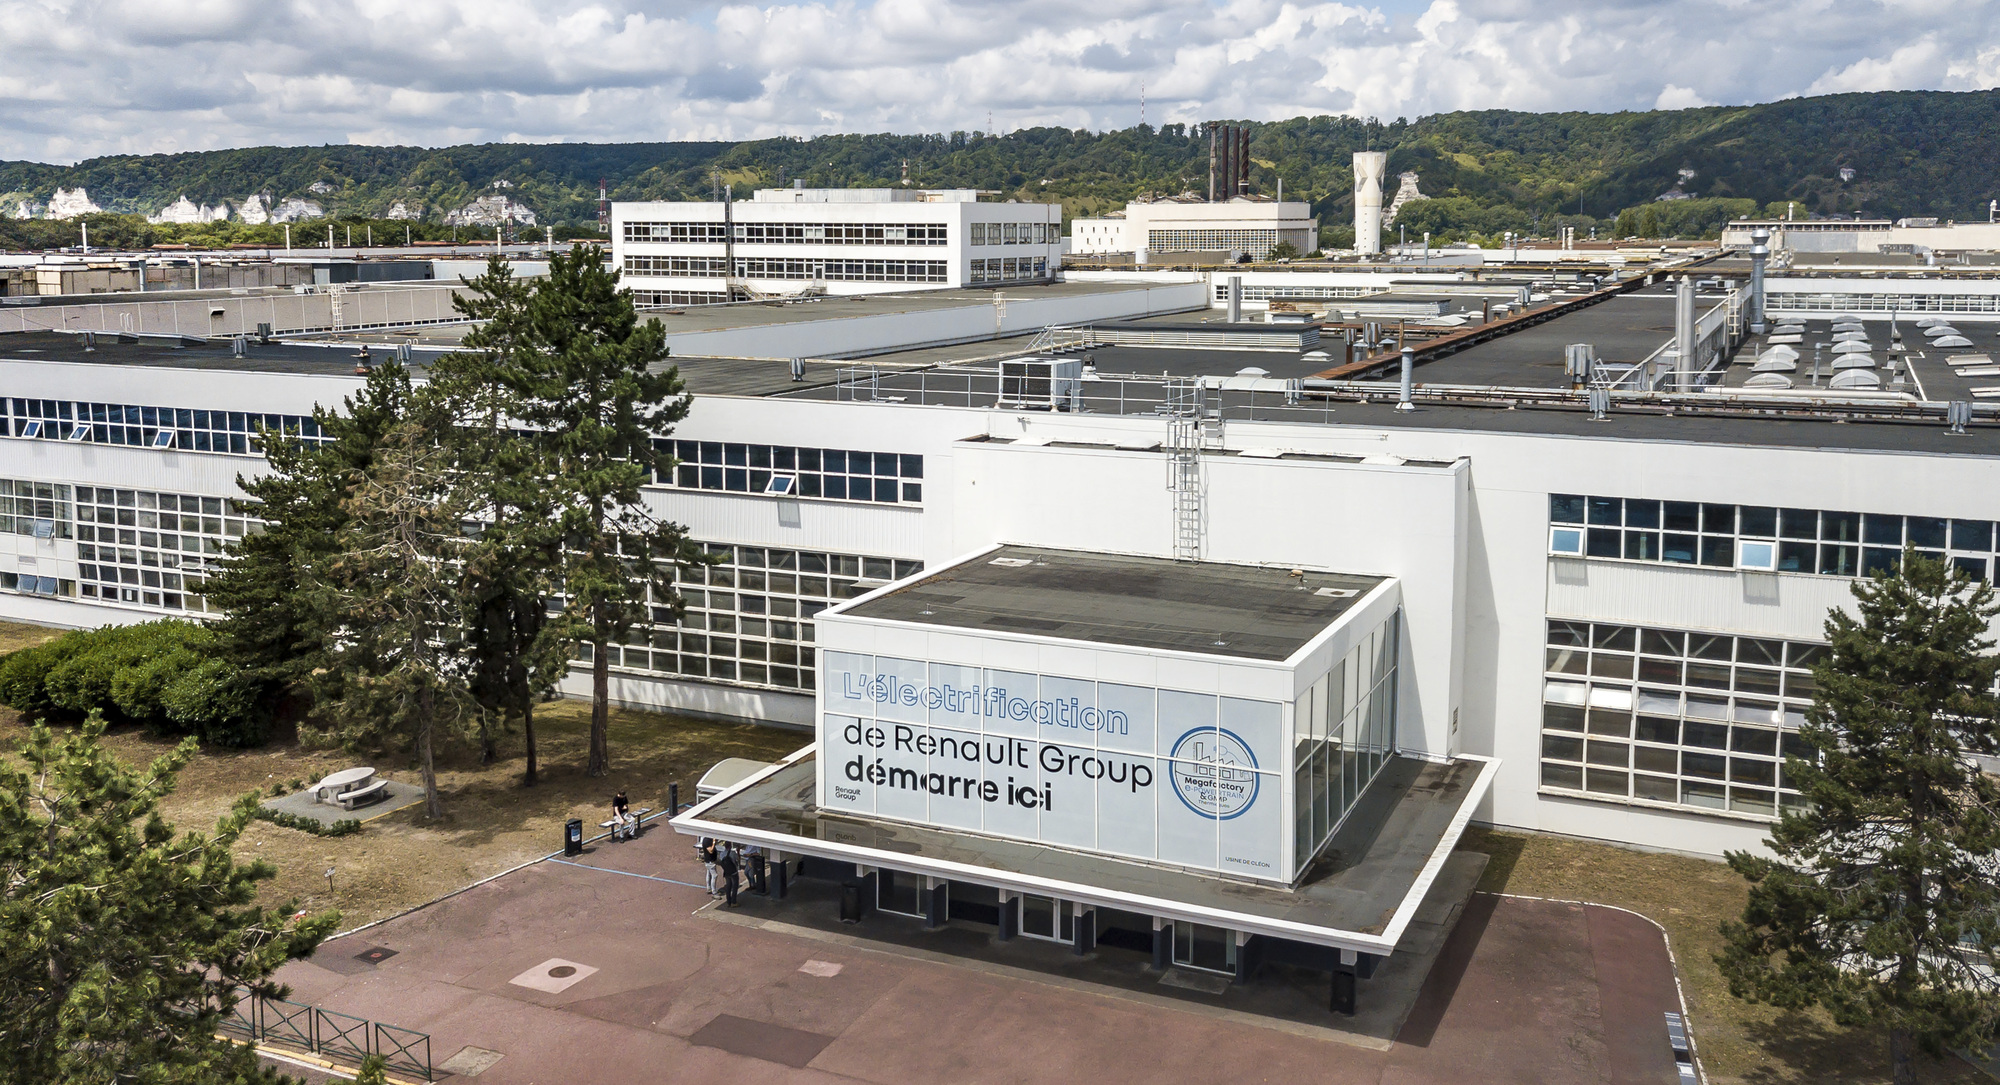 The Cléon plant embarks on its “industrial Renaulution” and goes electric